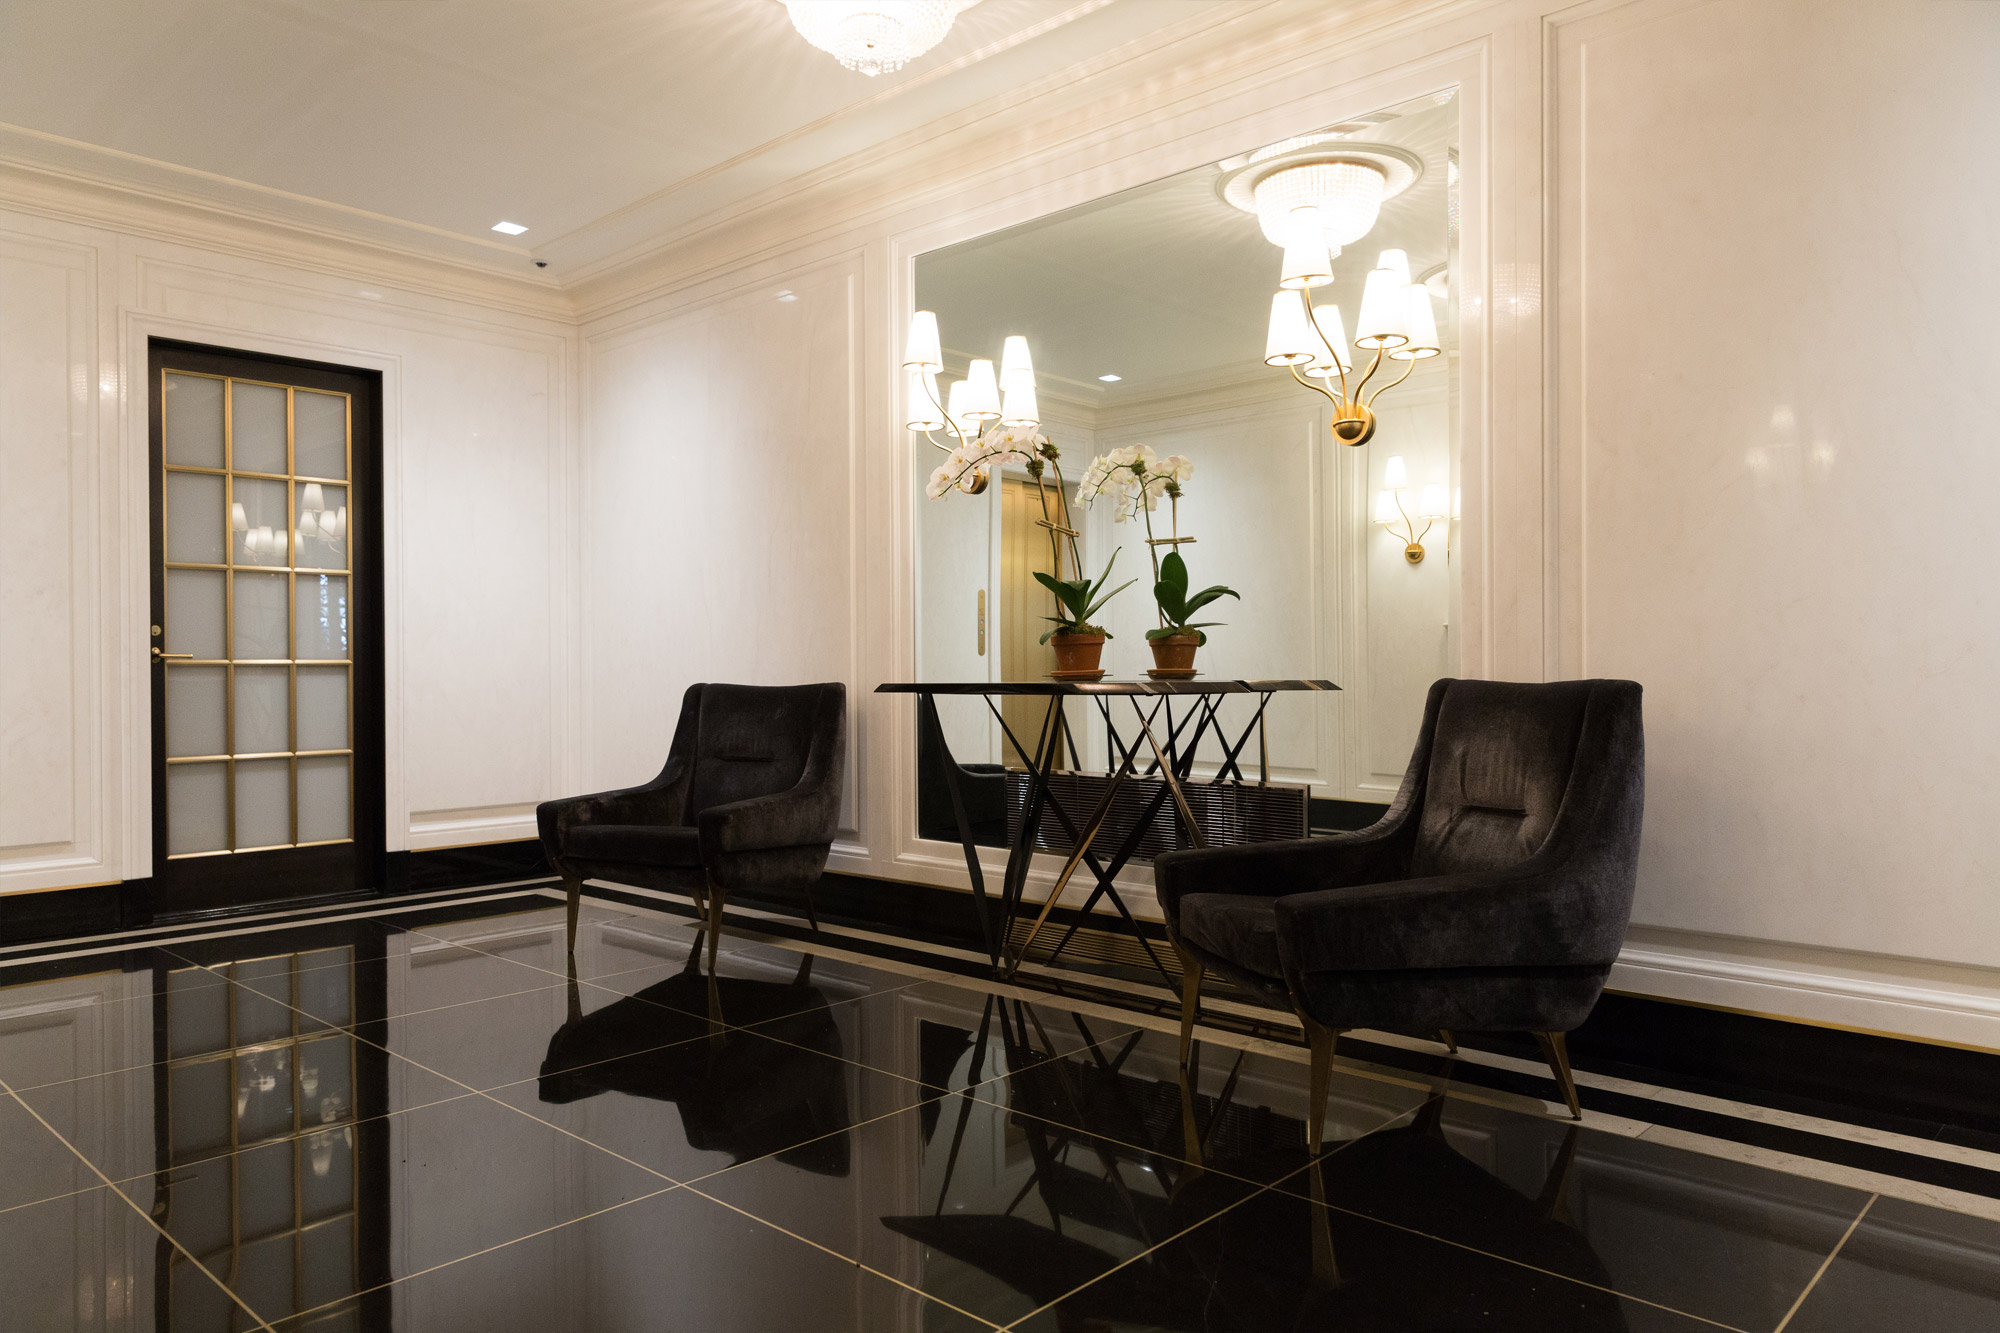 Lobby Renovation in an UES Pre-War Apartment Building - Furniture Mirror Wall